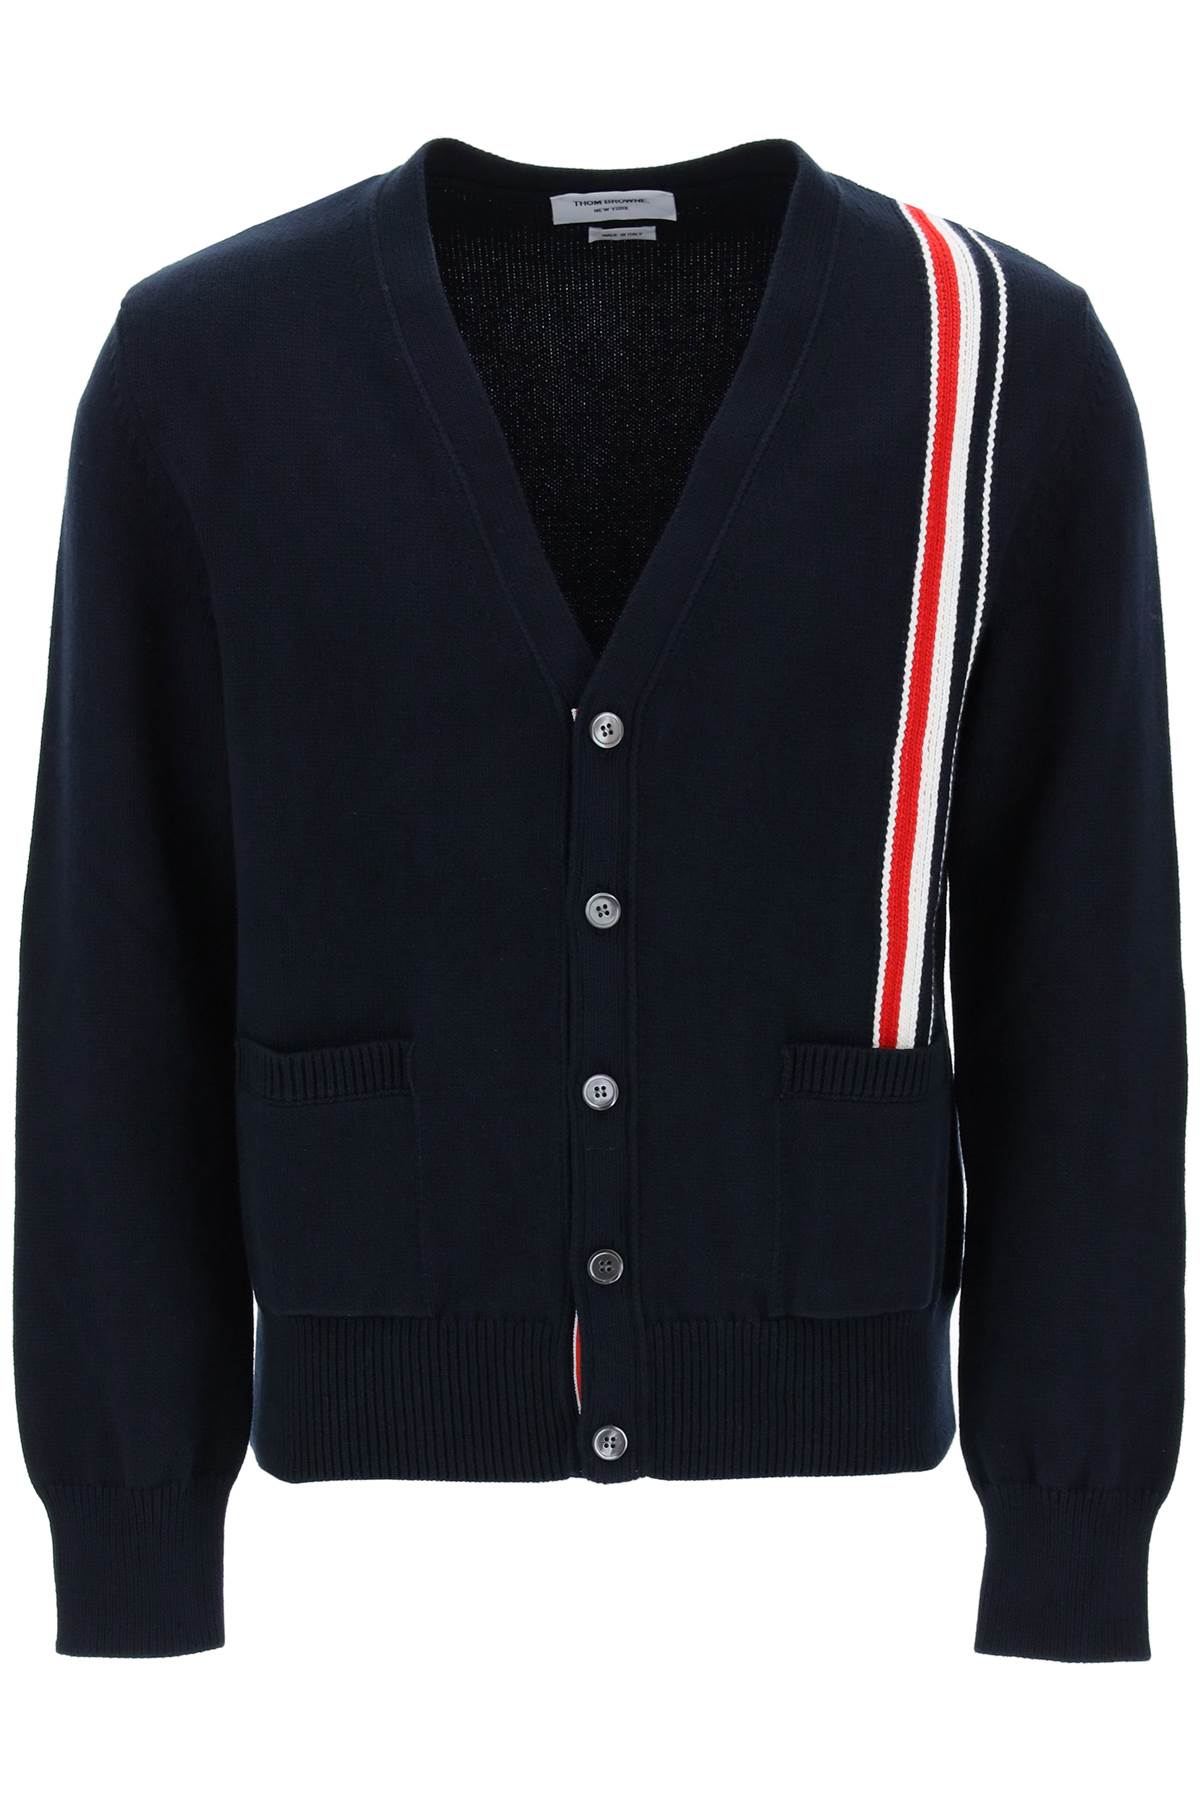 Thom browne cotton cardigan with red, white-0